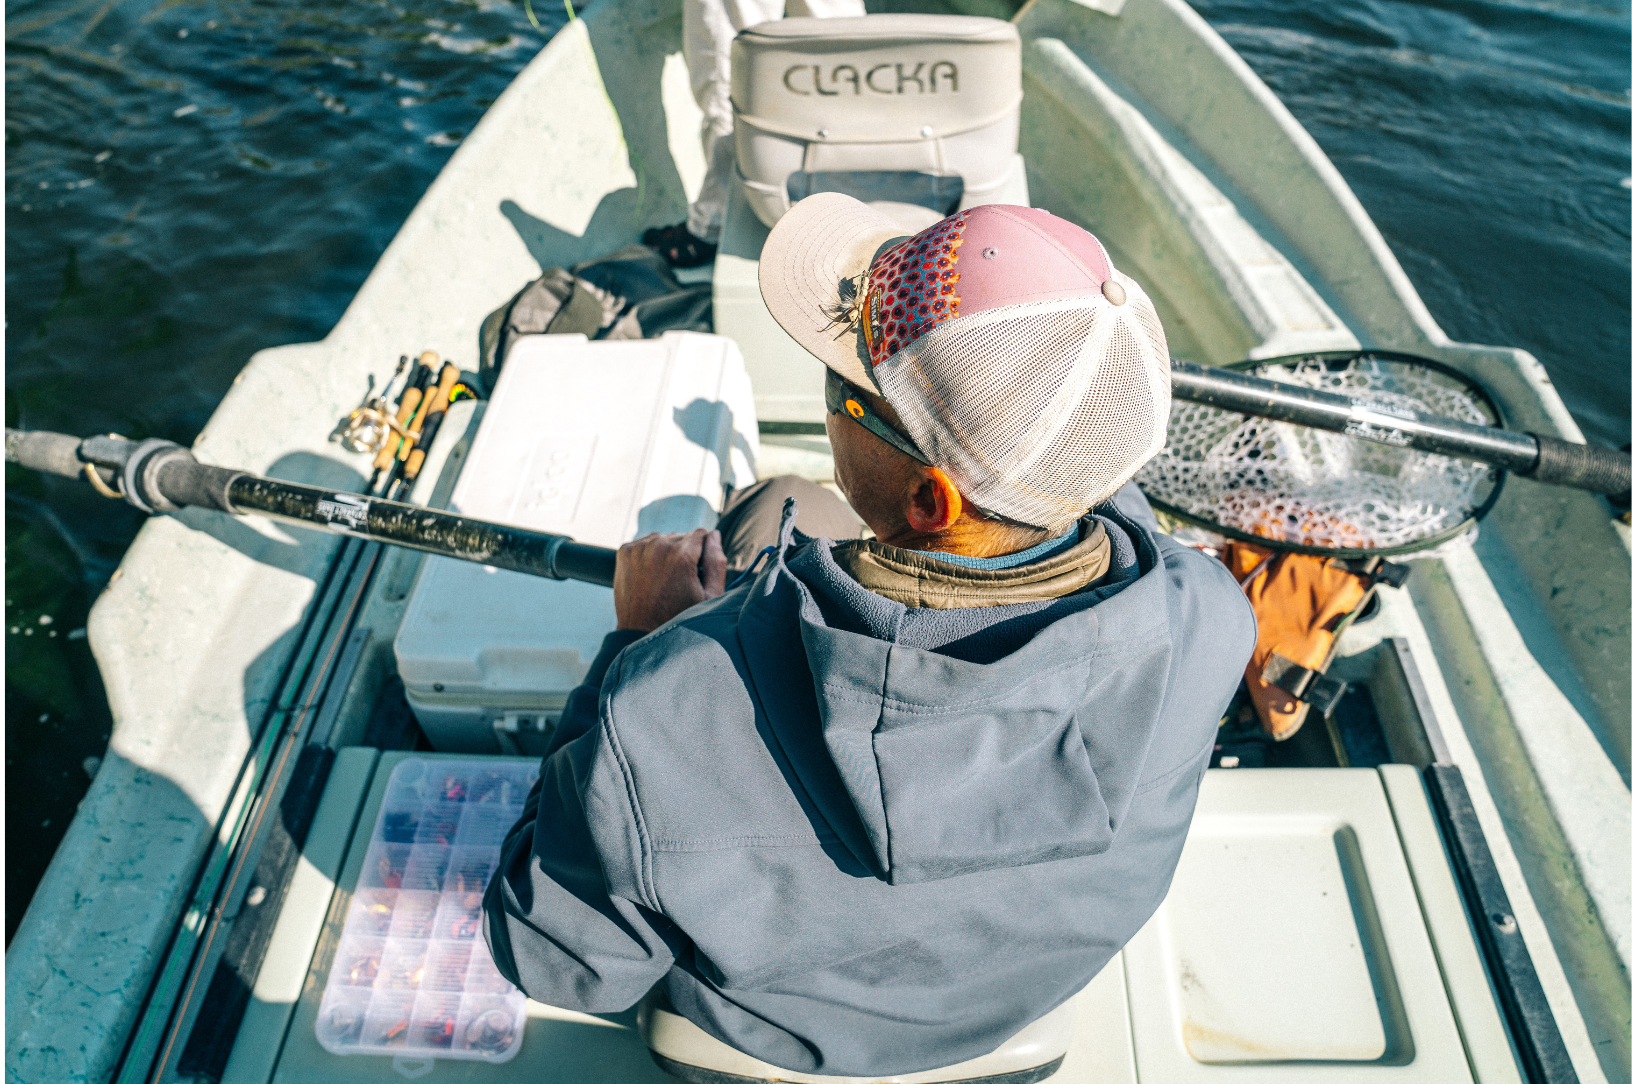 Expert opinions and guides on fishing gear